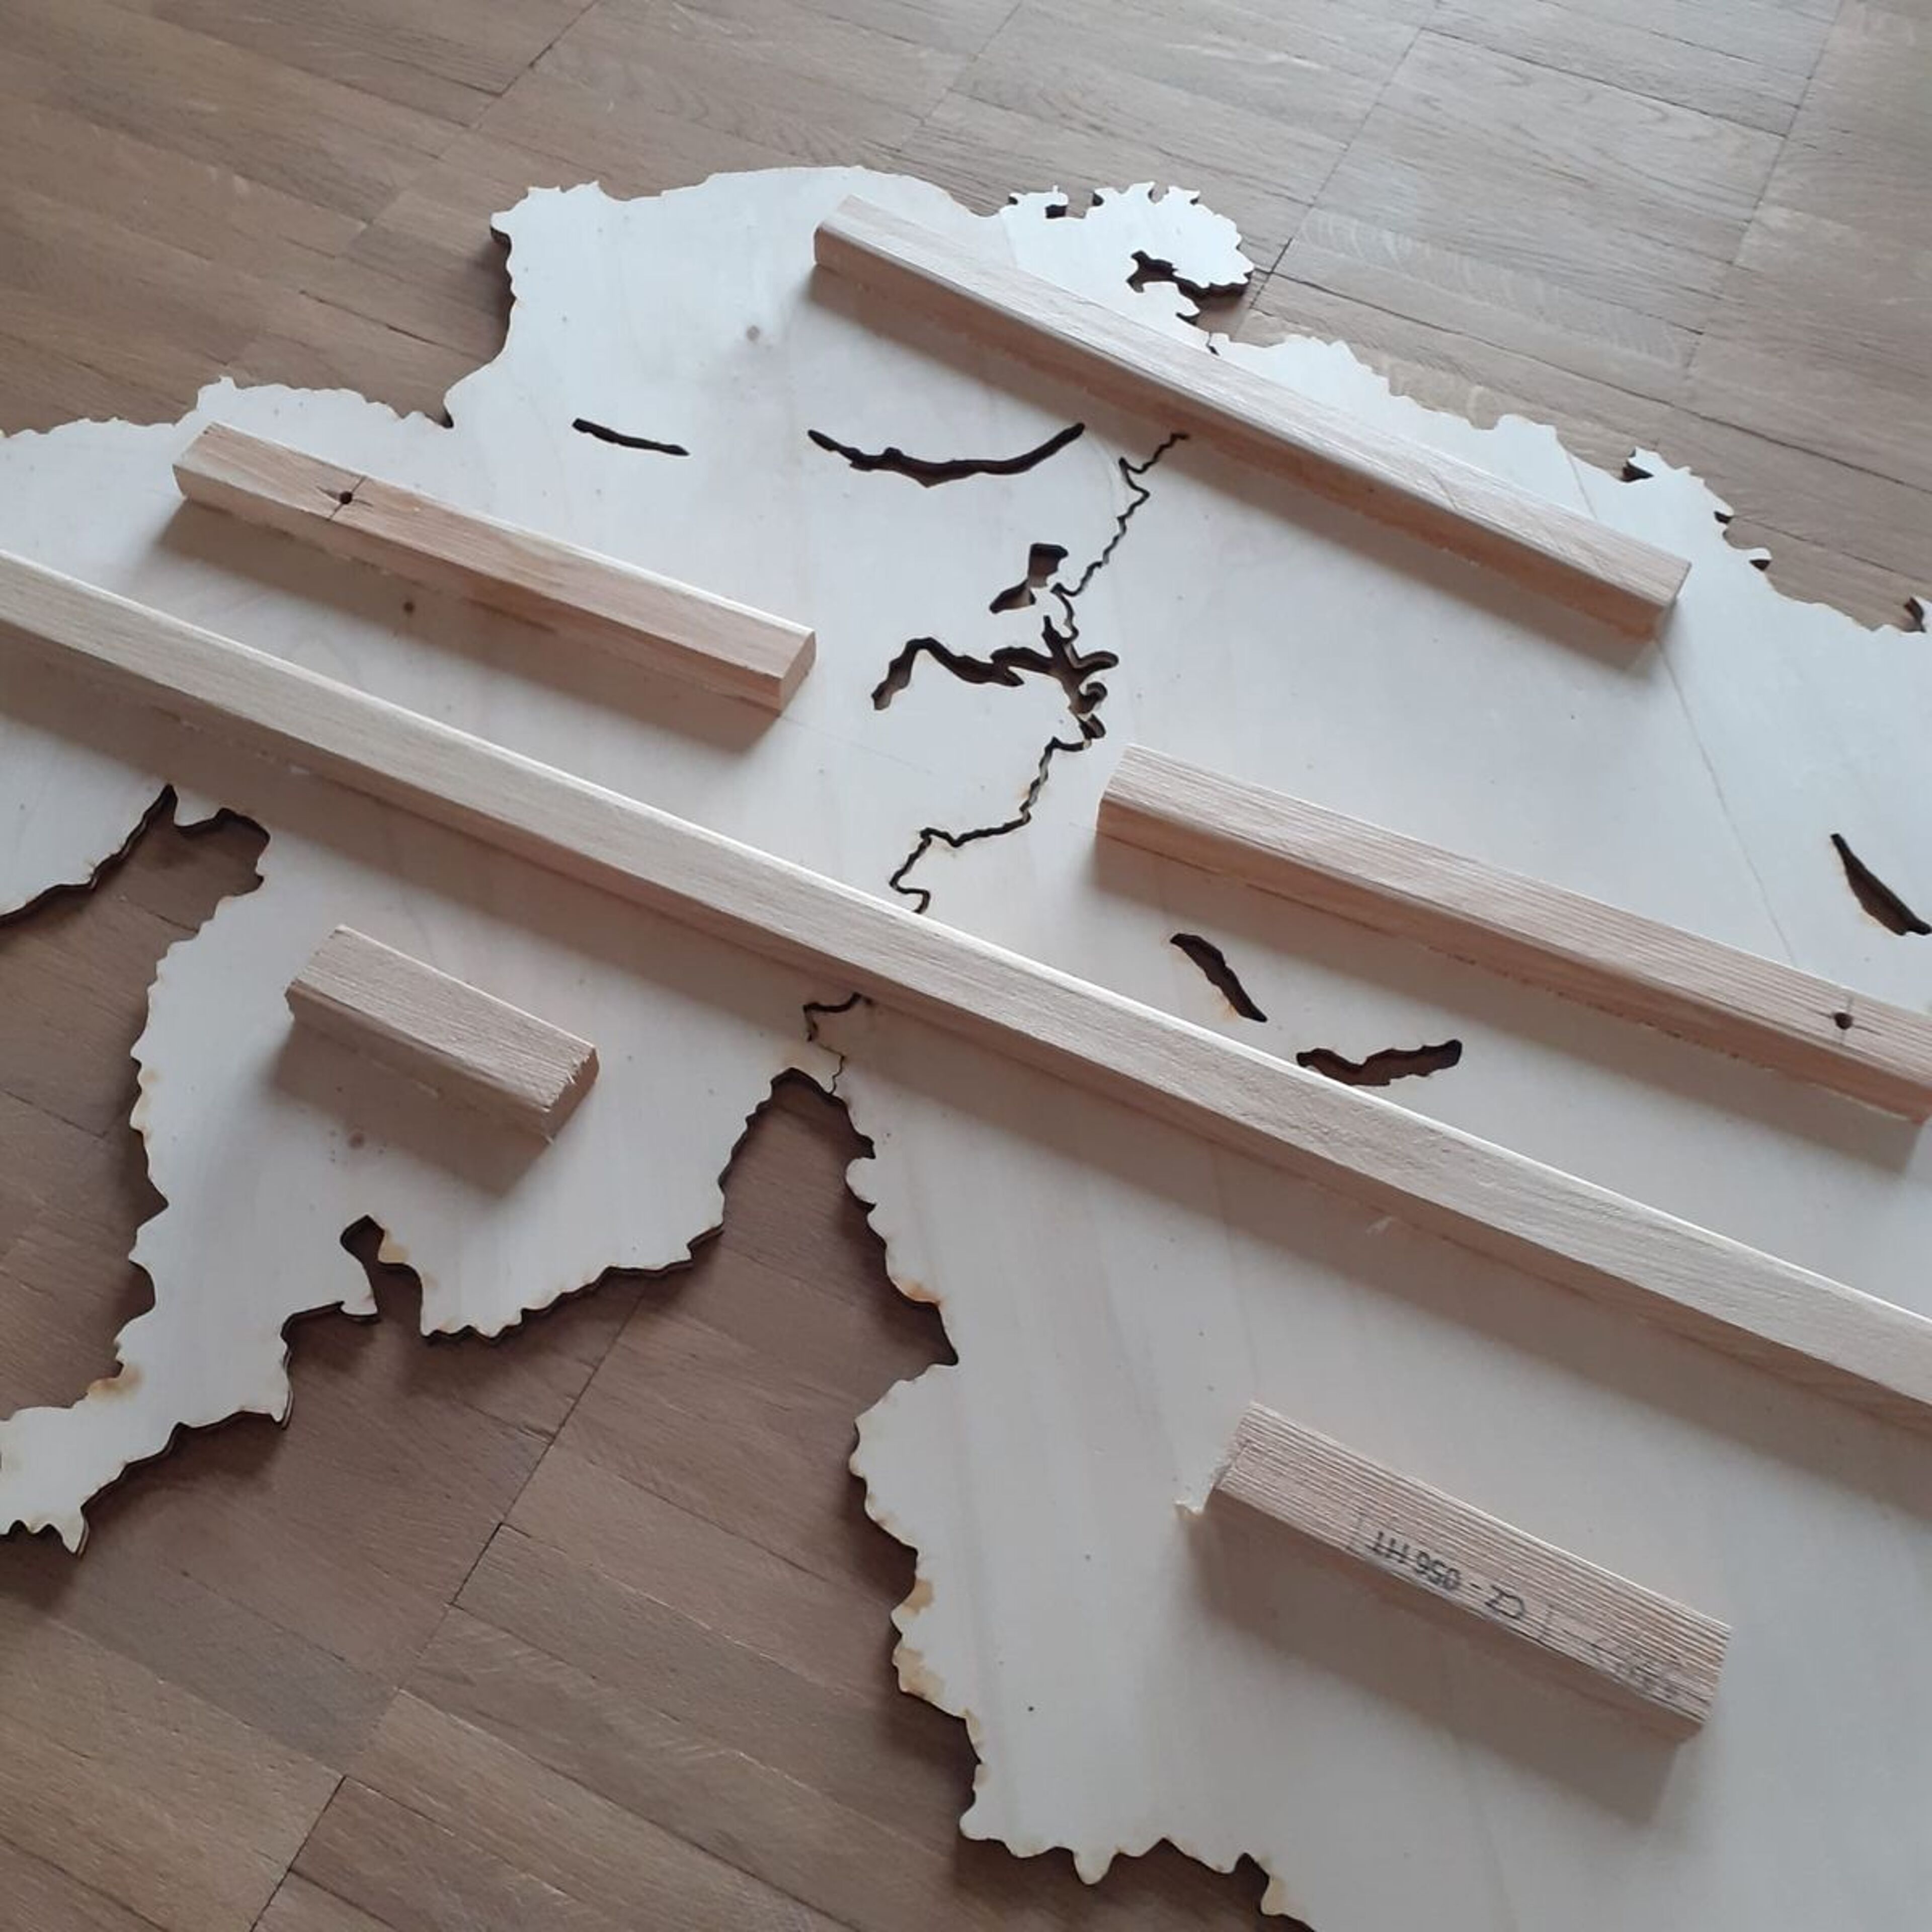 Review for Switzerland Wooden Map - image from Anonym